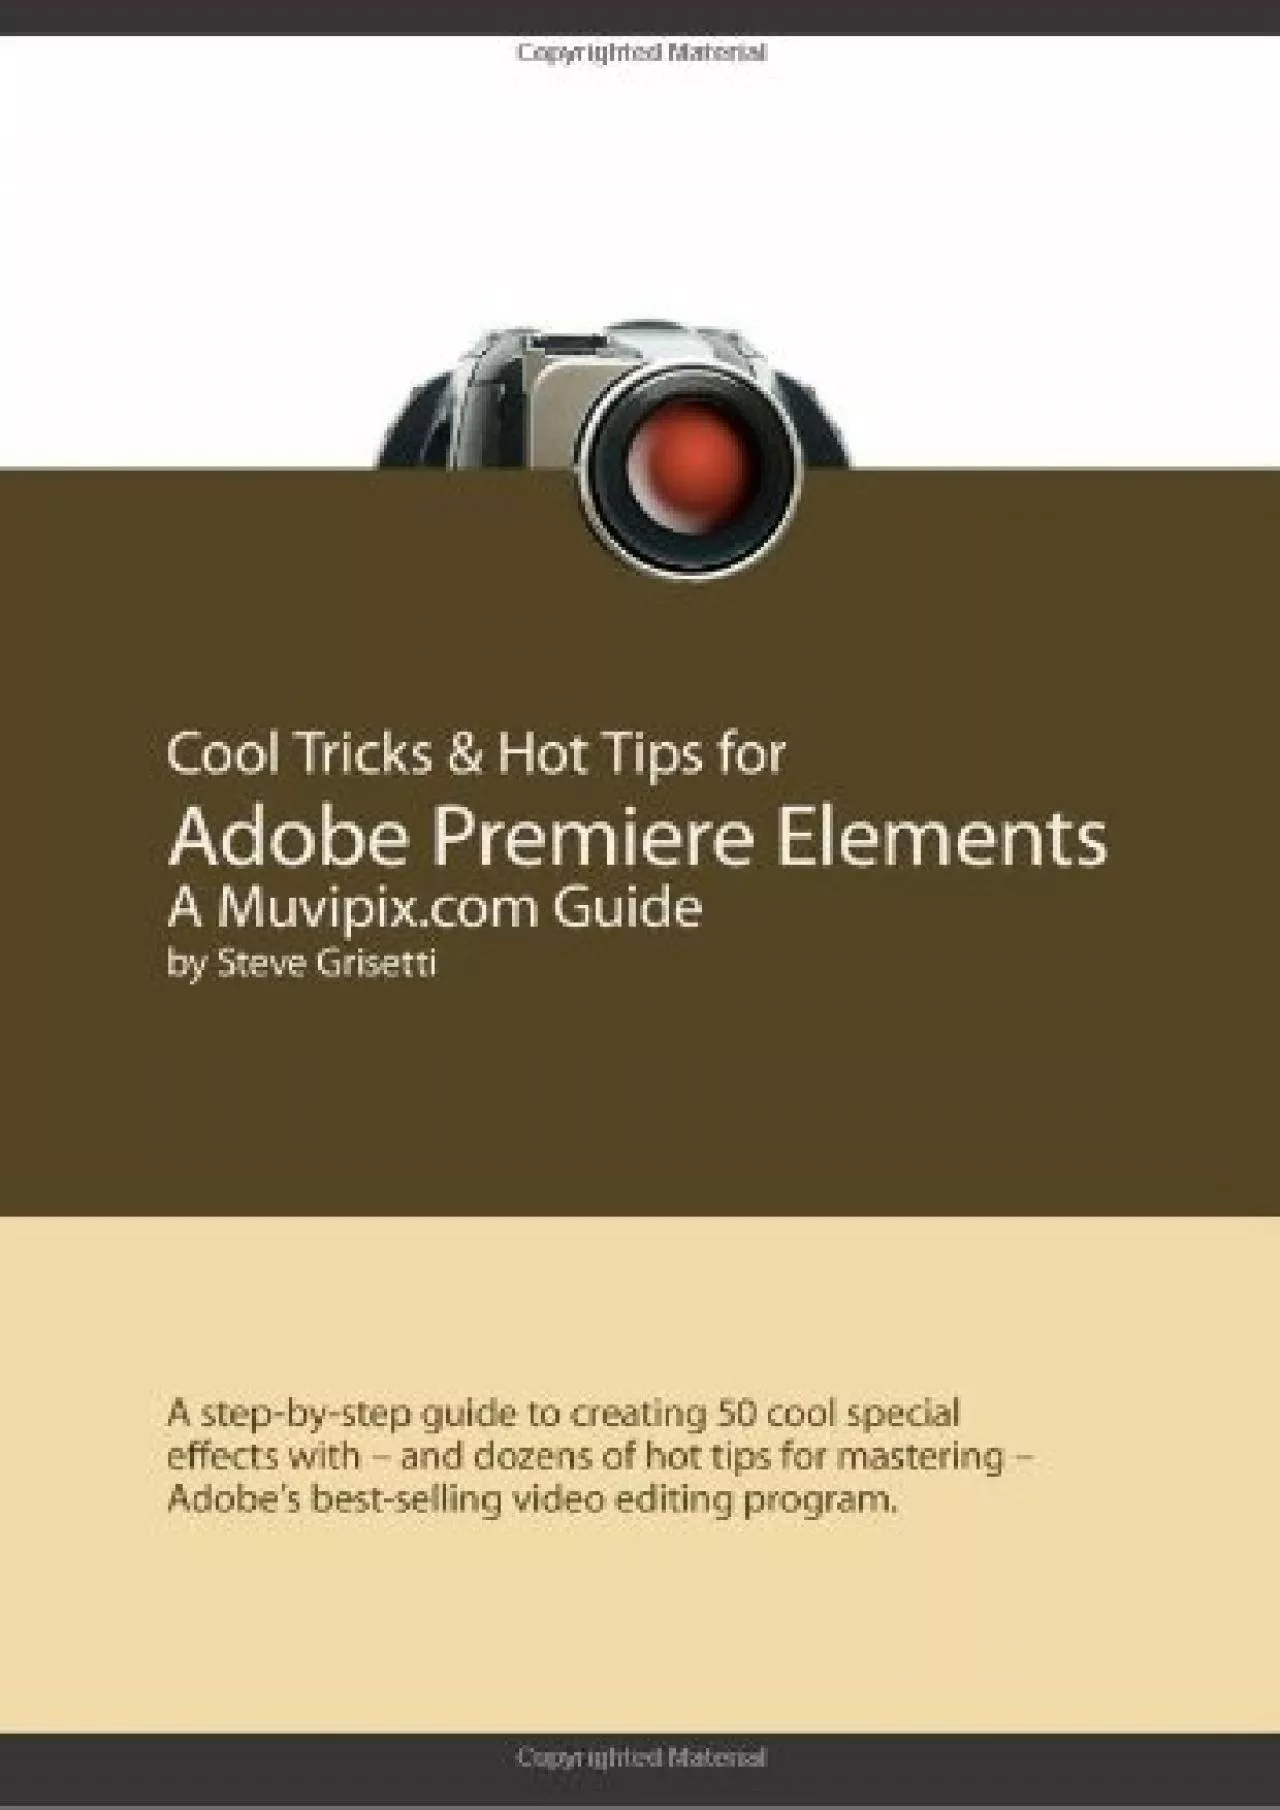 (BOOK)-Cool Tricks & Hot Tips for Adobe Premiere Elements, A Muvipix.com Guide: A step-by-step